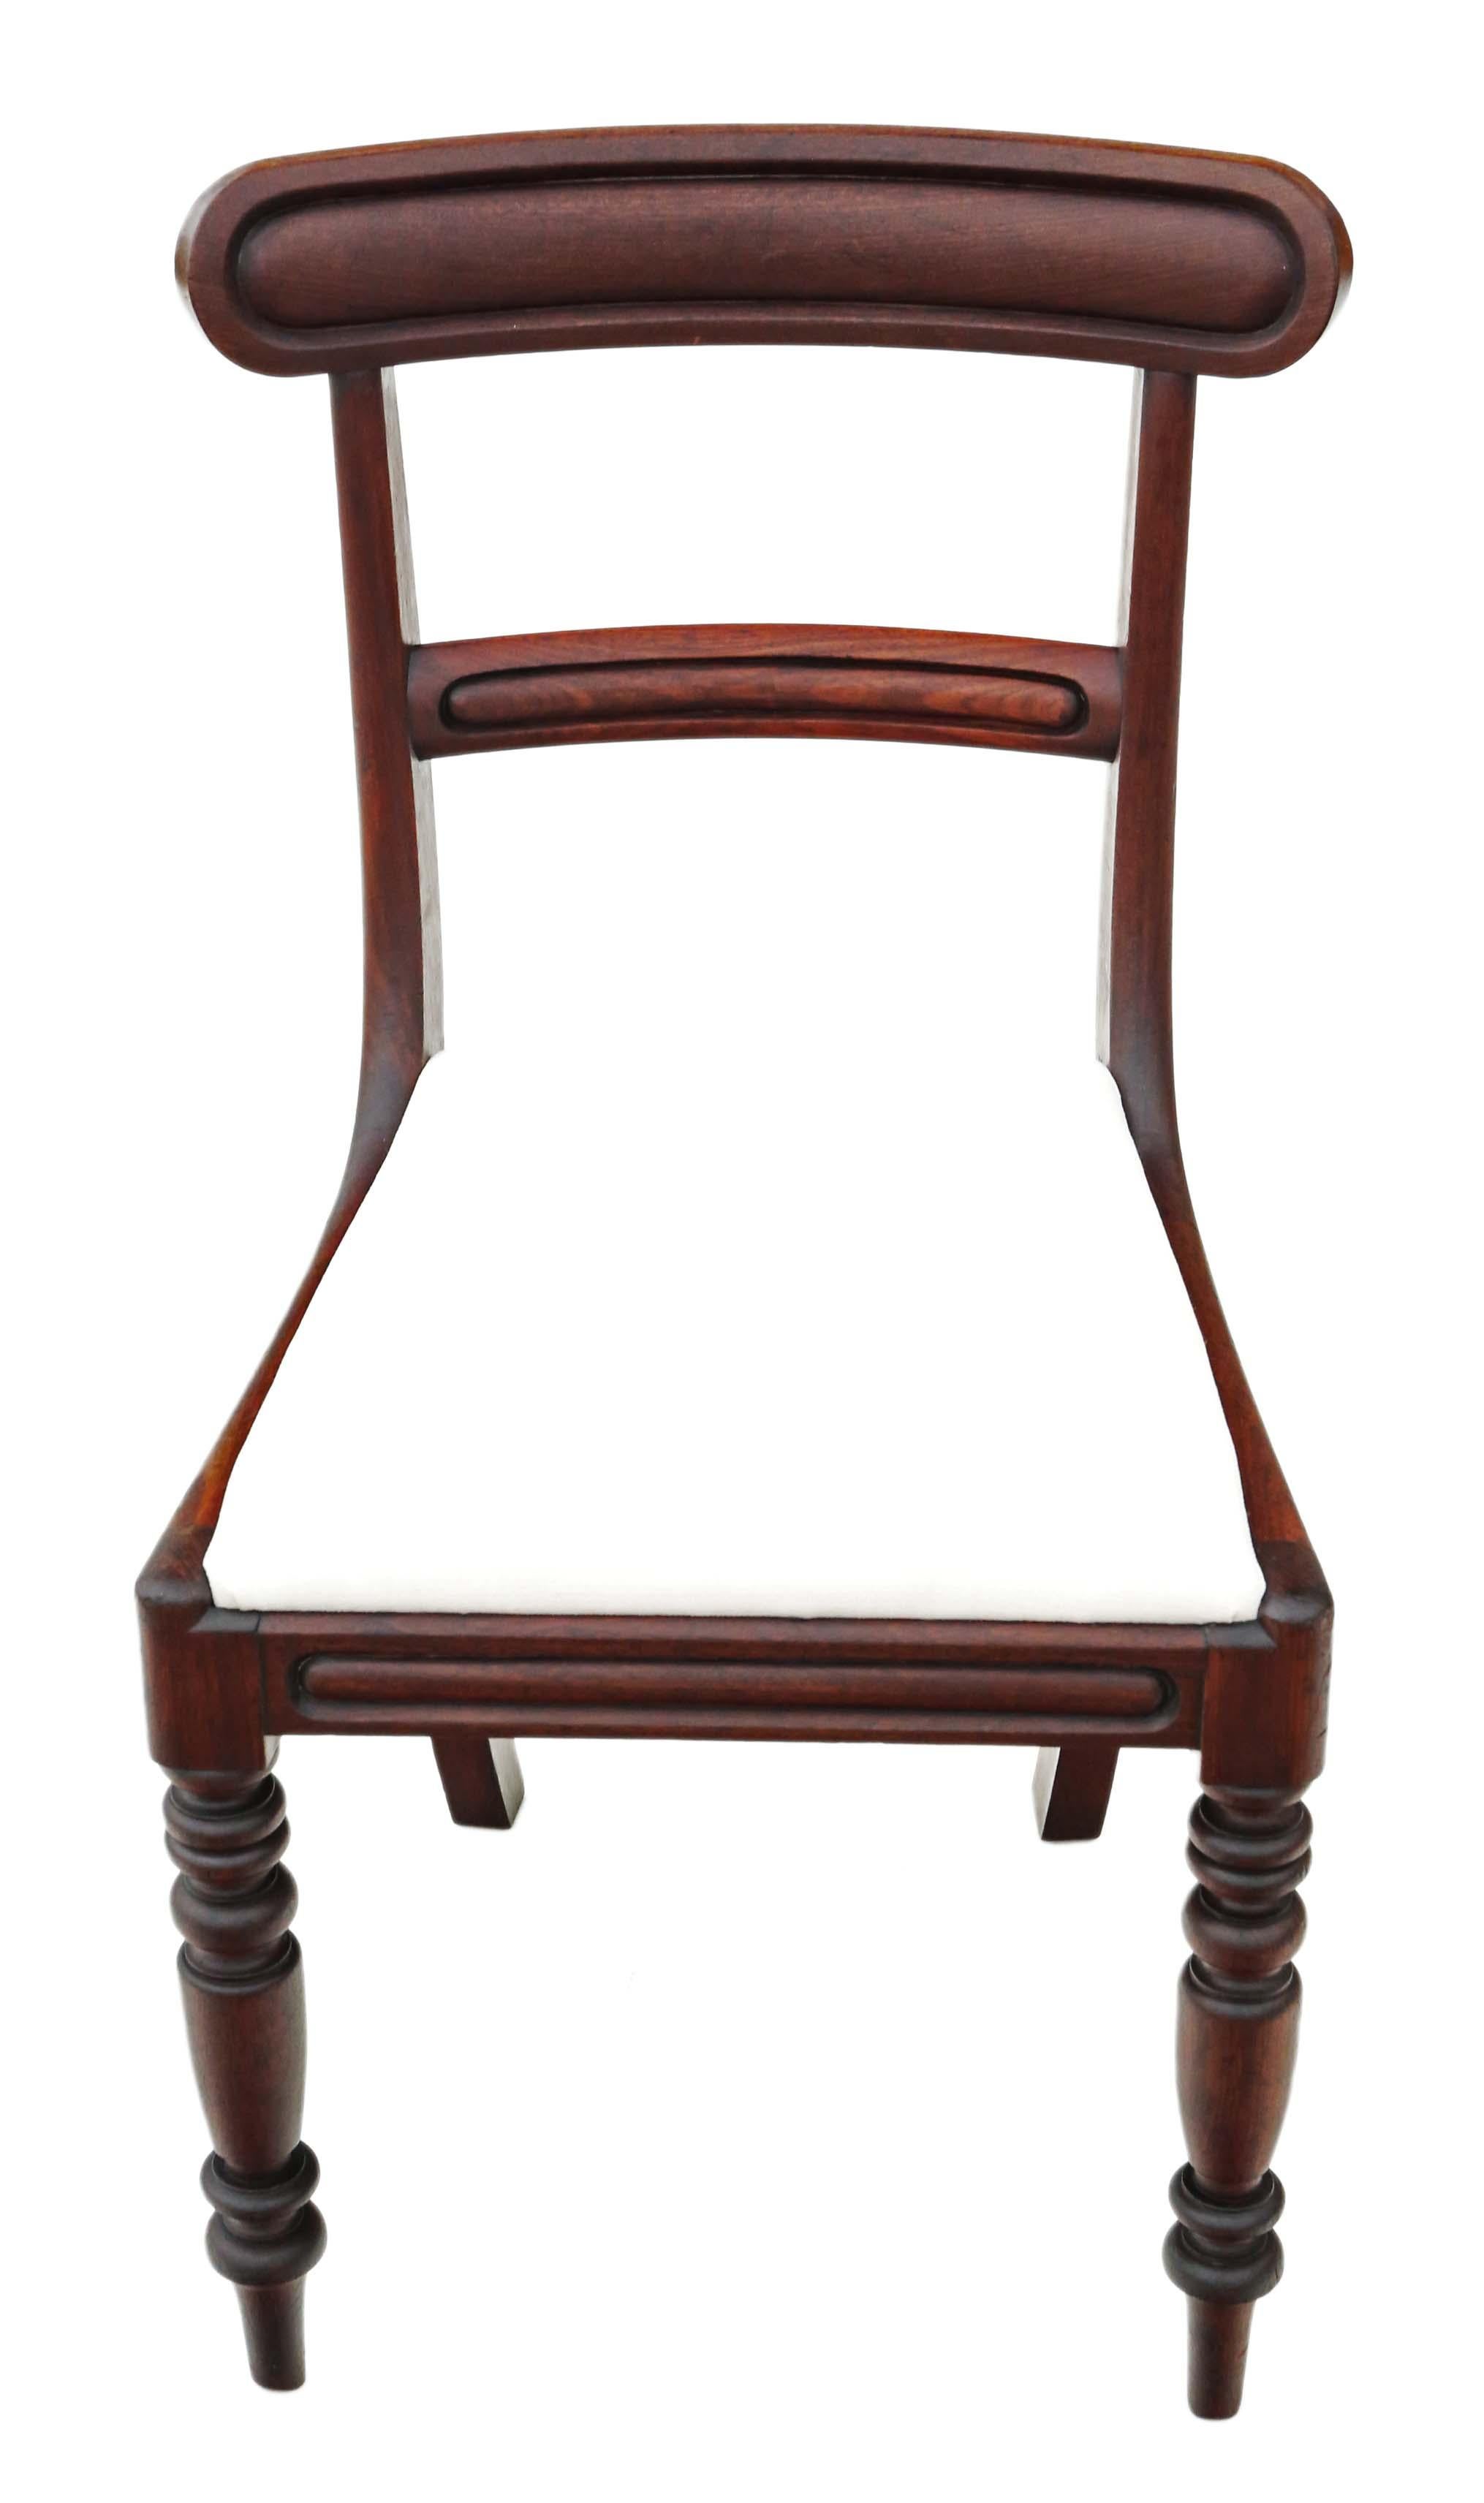 Antique circa 1850 Set of 6 Victorian Mahogany Dining Chairs In Good Condition For Sale In Wisbech, Cambridgeshire